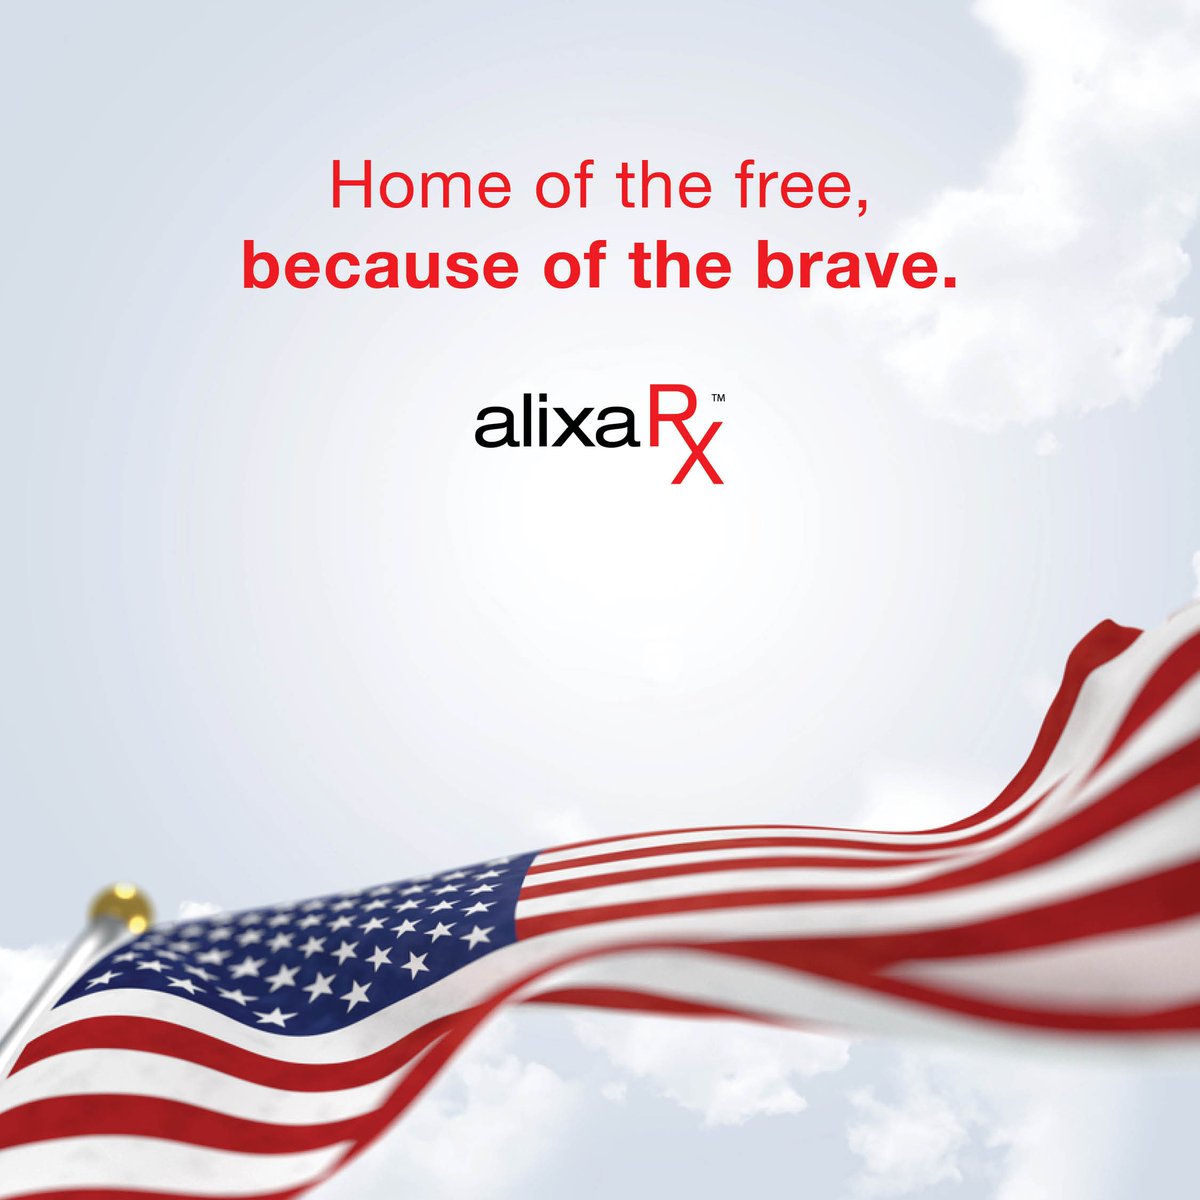 Honoring and remembering those who made the ultimate sacrifice for our freedom. 

#MemorialDay #AlixaRx